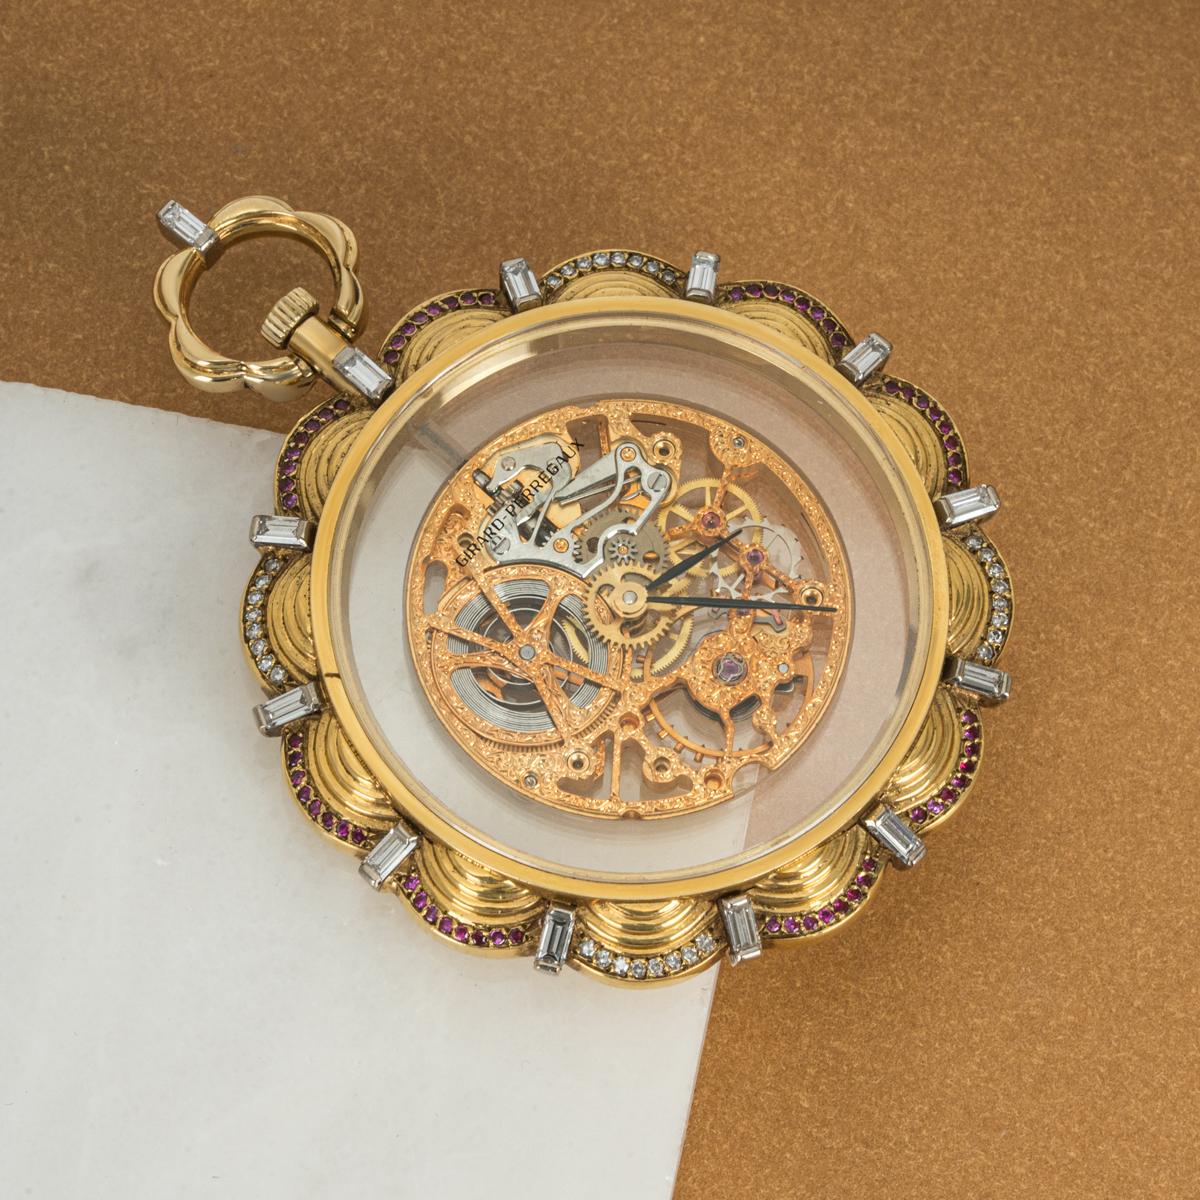 Girard Perregaux. A Rare Gold Skeleton Diamond & Ruby Set Keyless Lever Pocket Watch C1960s

Dial: The dial is the glass which is signed Girard Perregaux, as this is a skeleton pocket watch. The diamond markers on the edge of the case are the hour